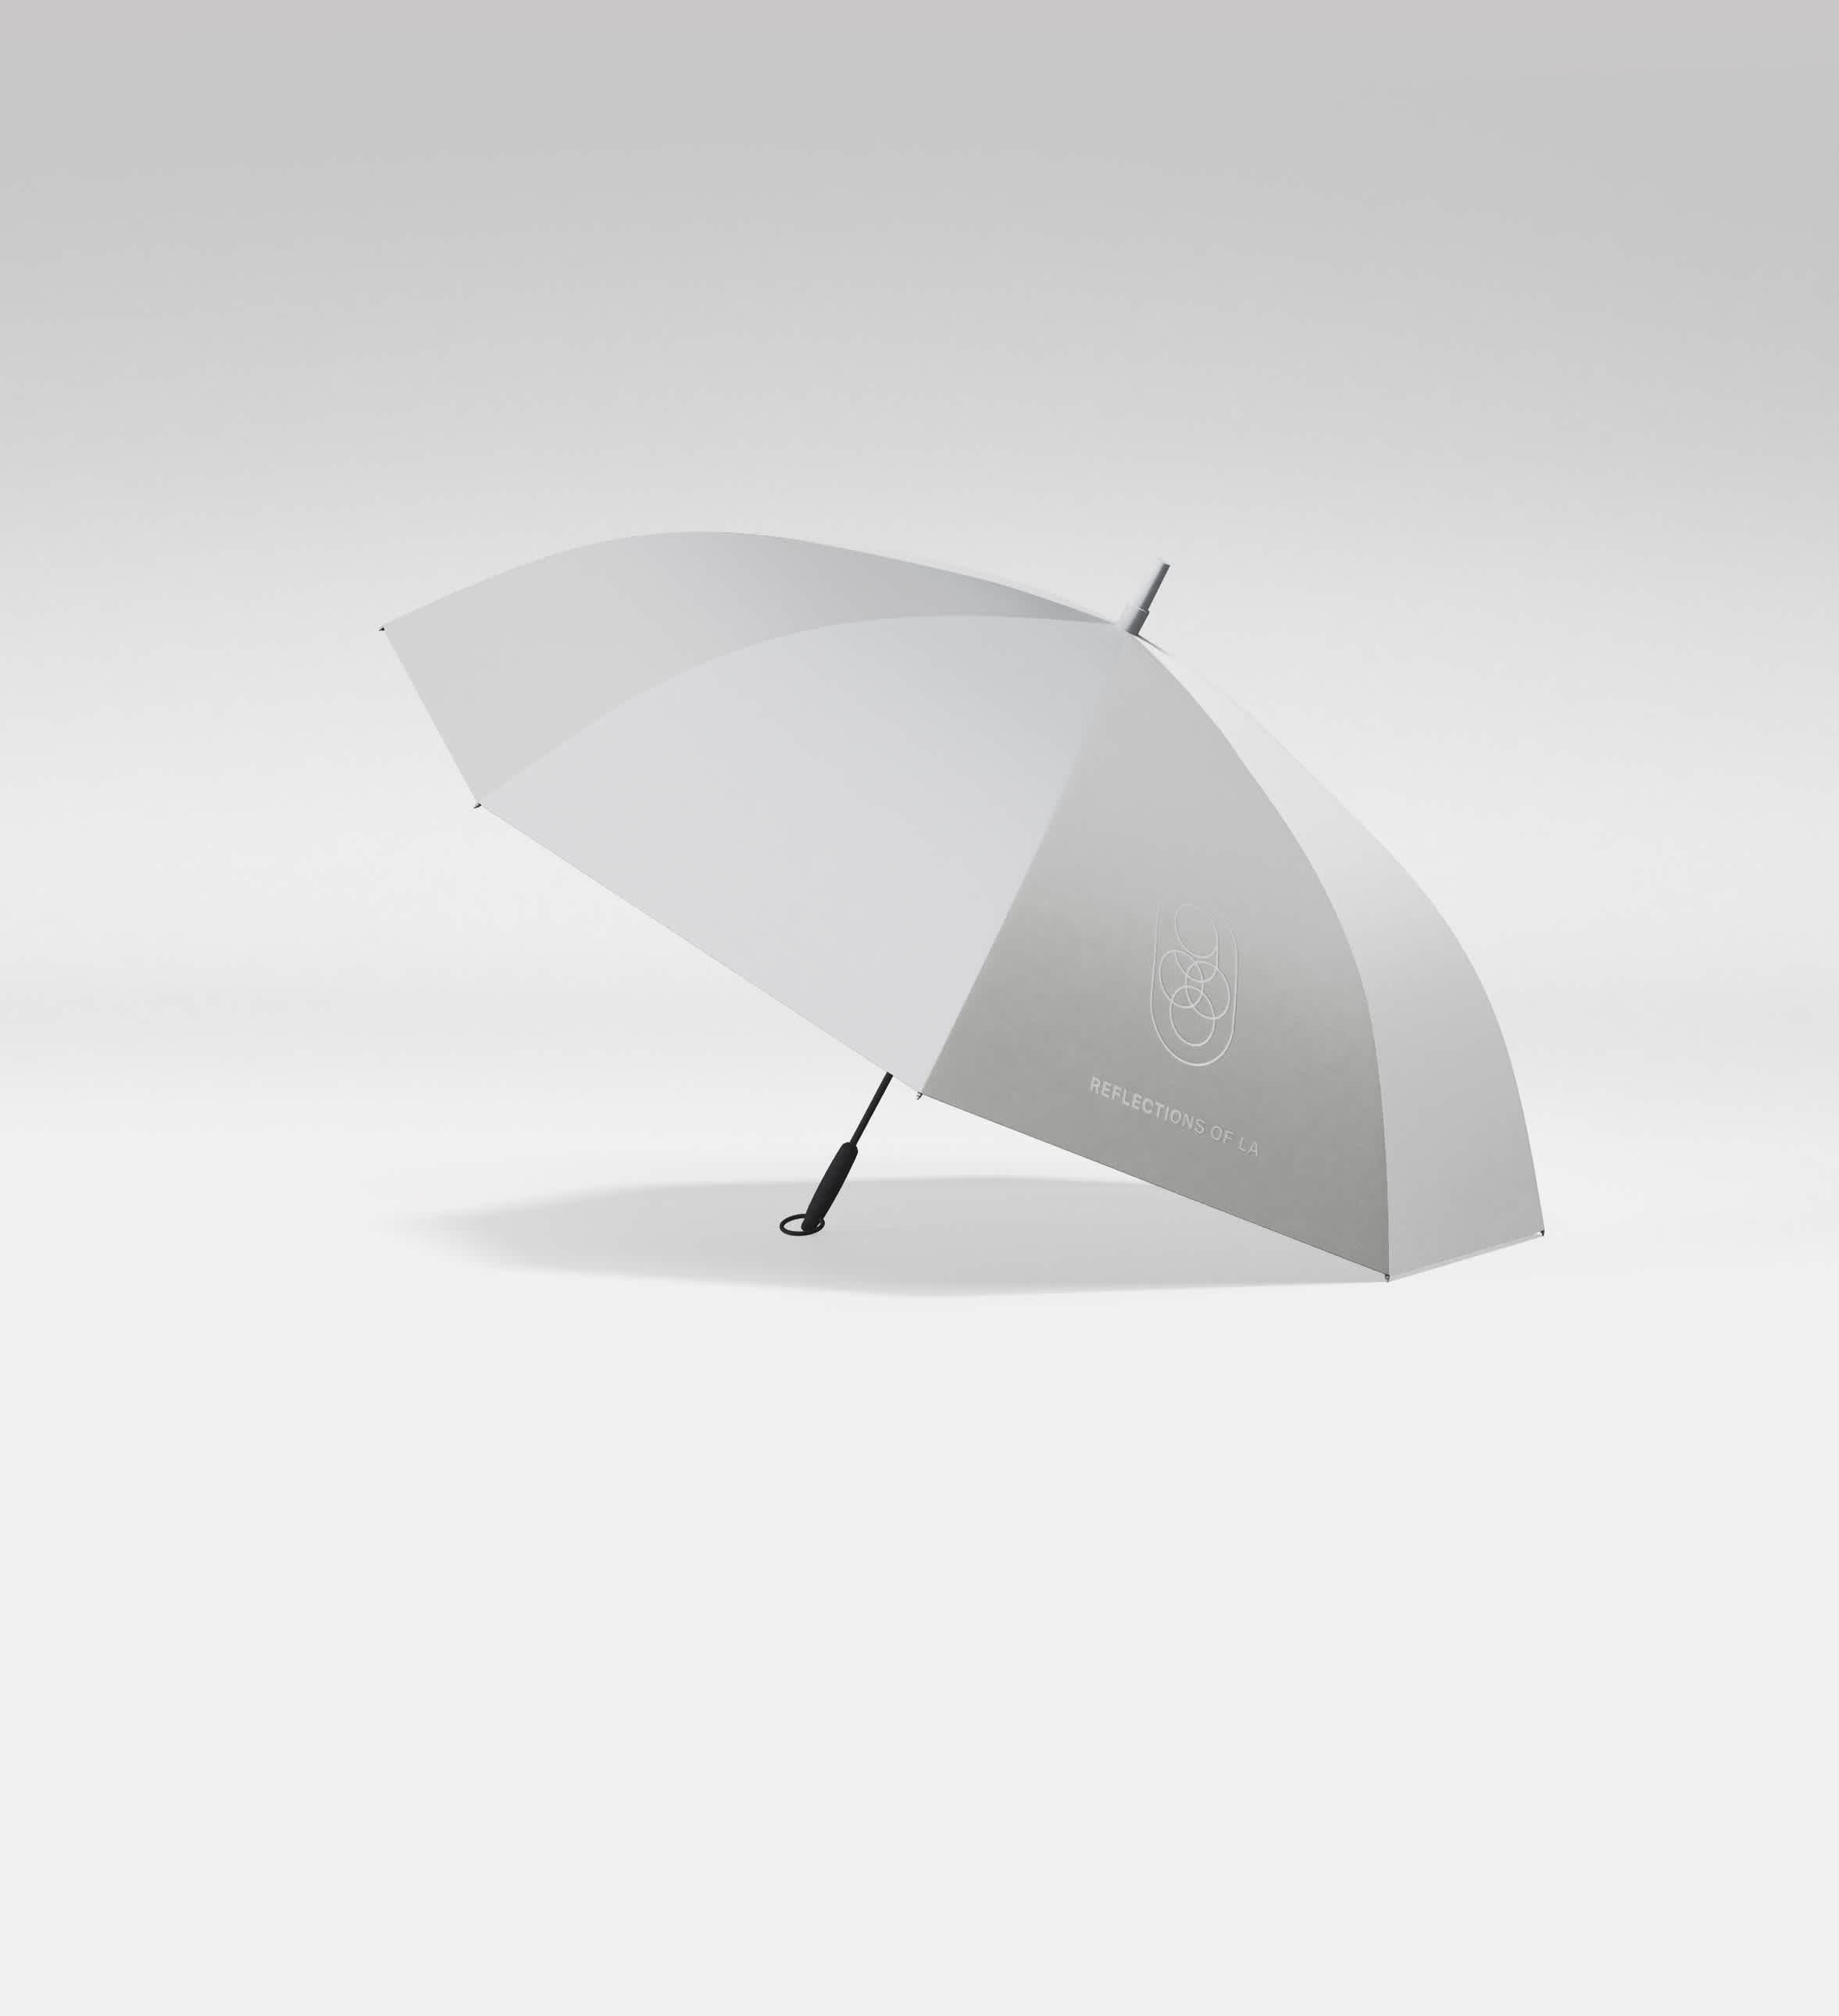 Experience elegance even on rainy days with the Four Seasons Los Angeles' bespoke umbrella. Its minimalist design, featuring a subtle gray gradient and the 'Reflections of LA' emblem, captures the hotel's luxurious essence, making it a must-have accessory for the style-conscious traveler.